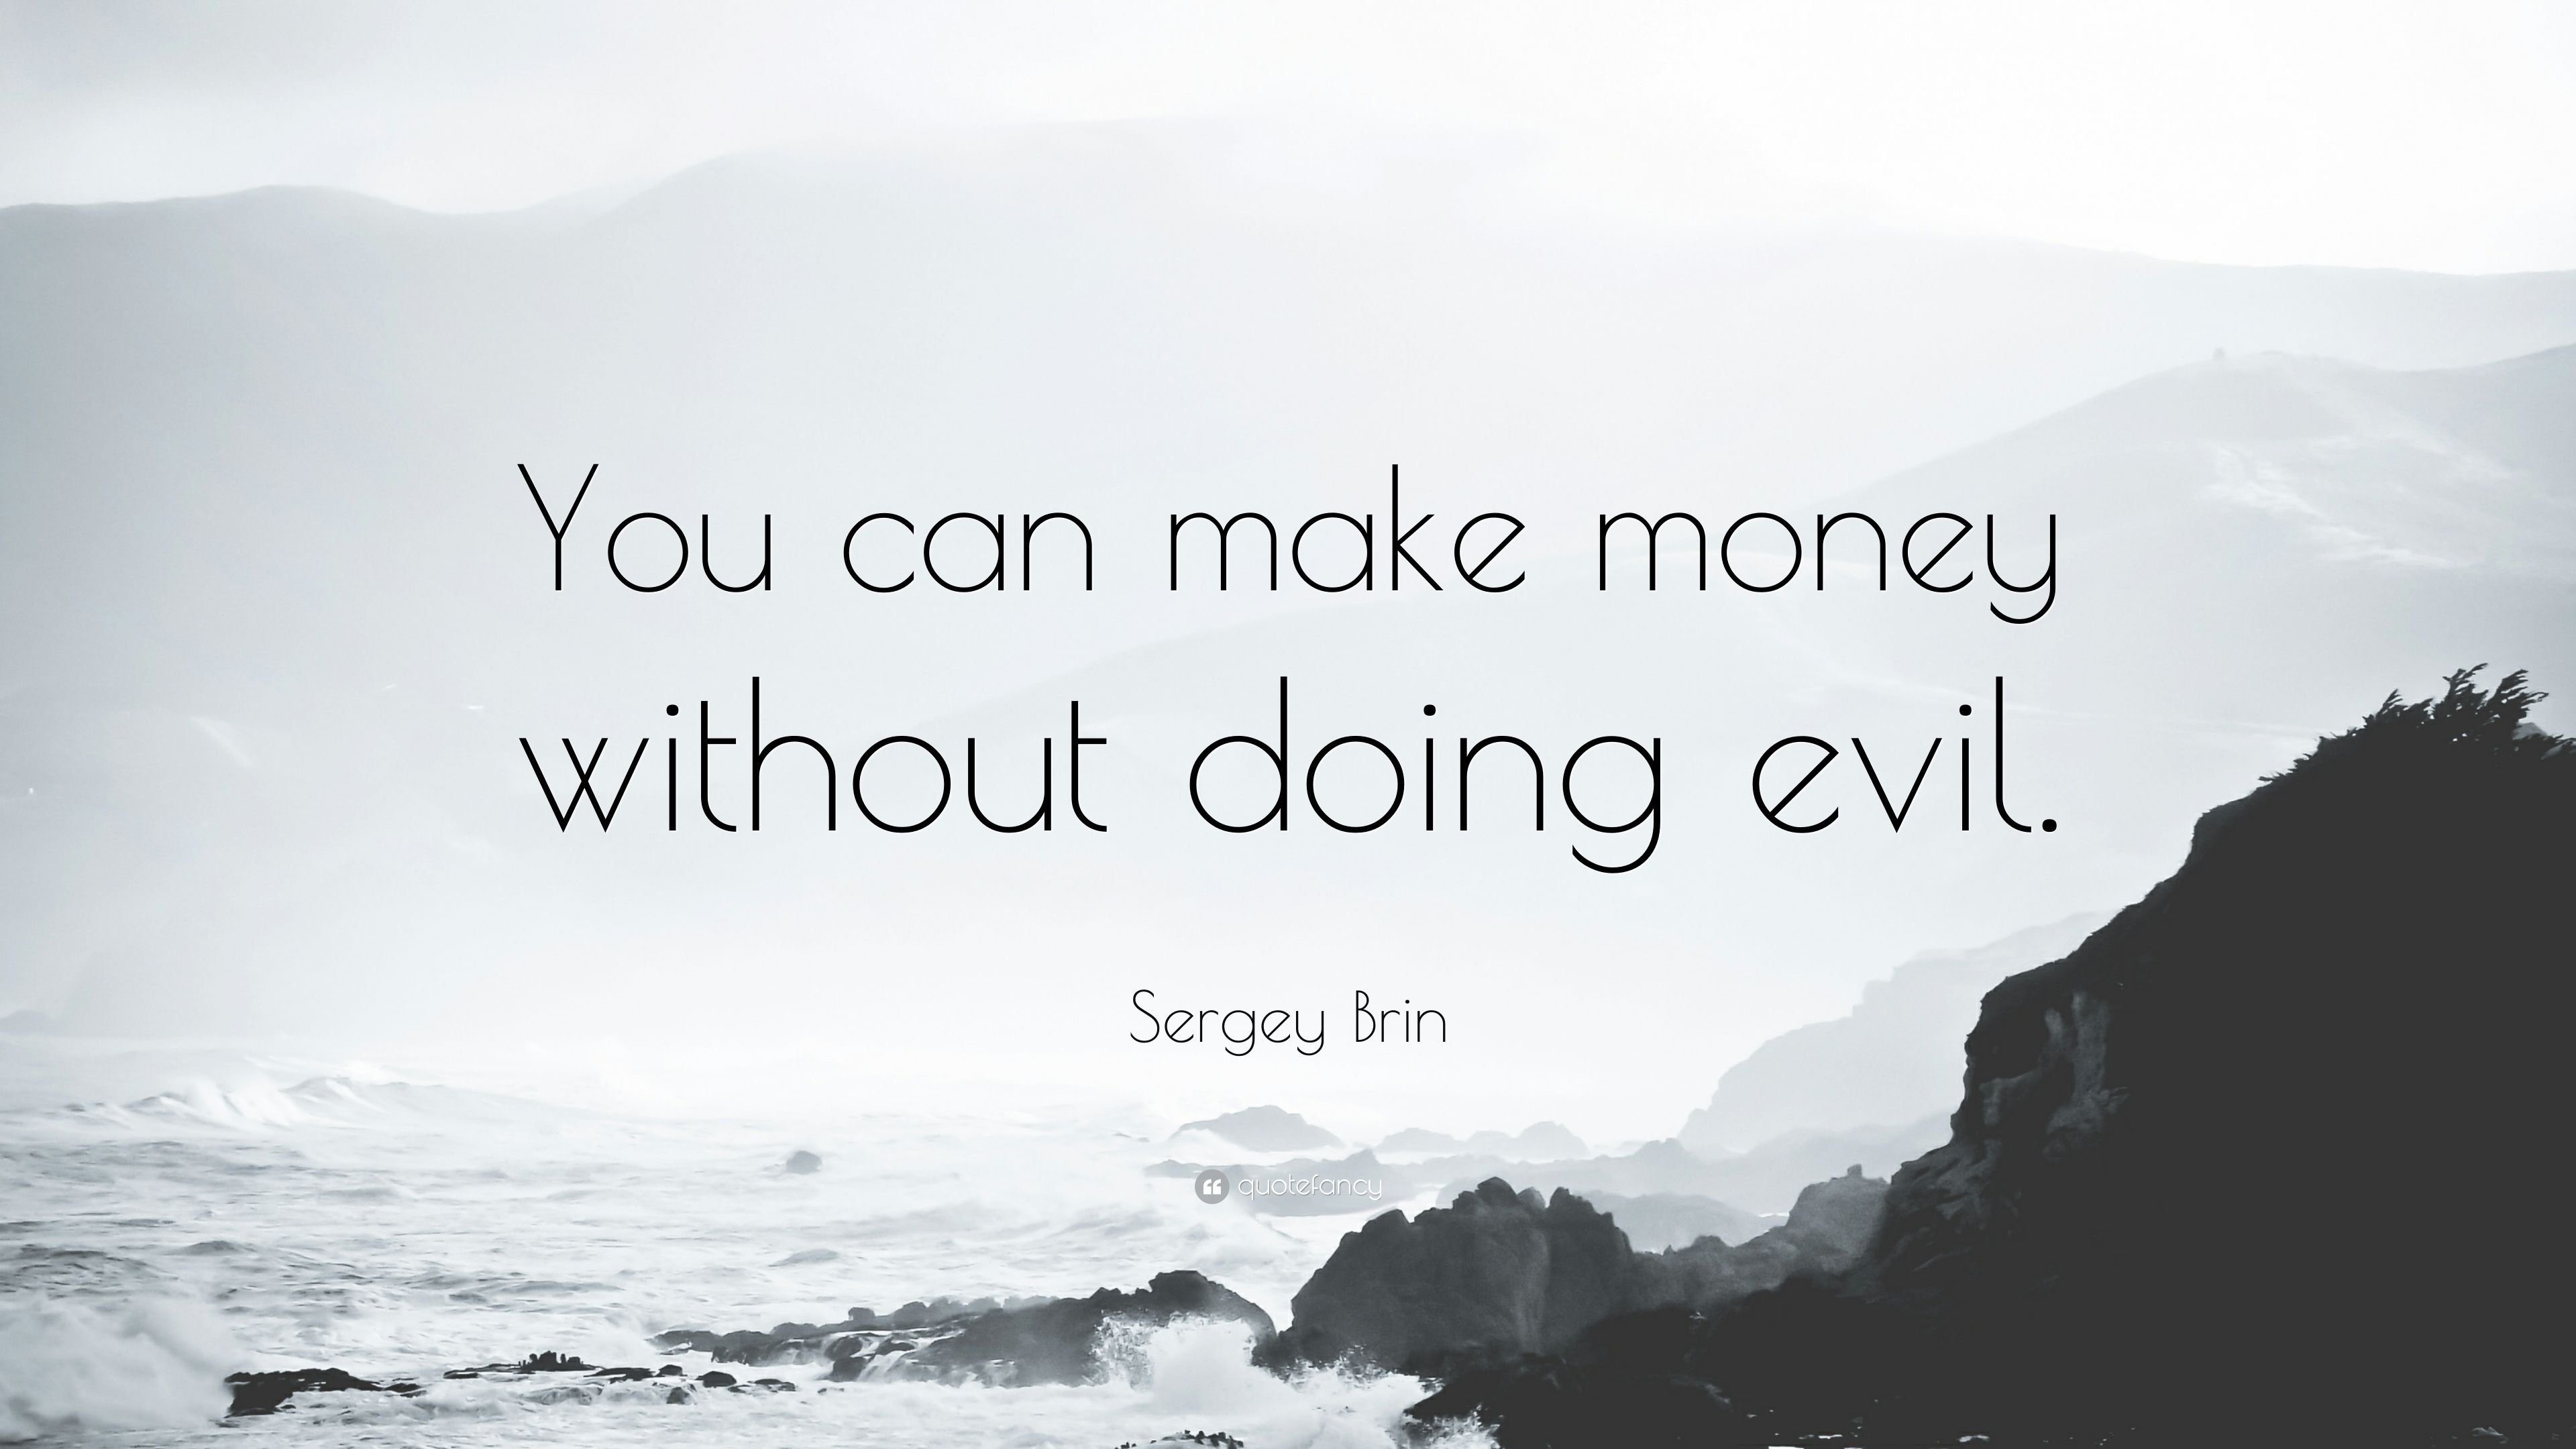 Sergey Brin Quote: “You can make money without doing evil.” 9